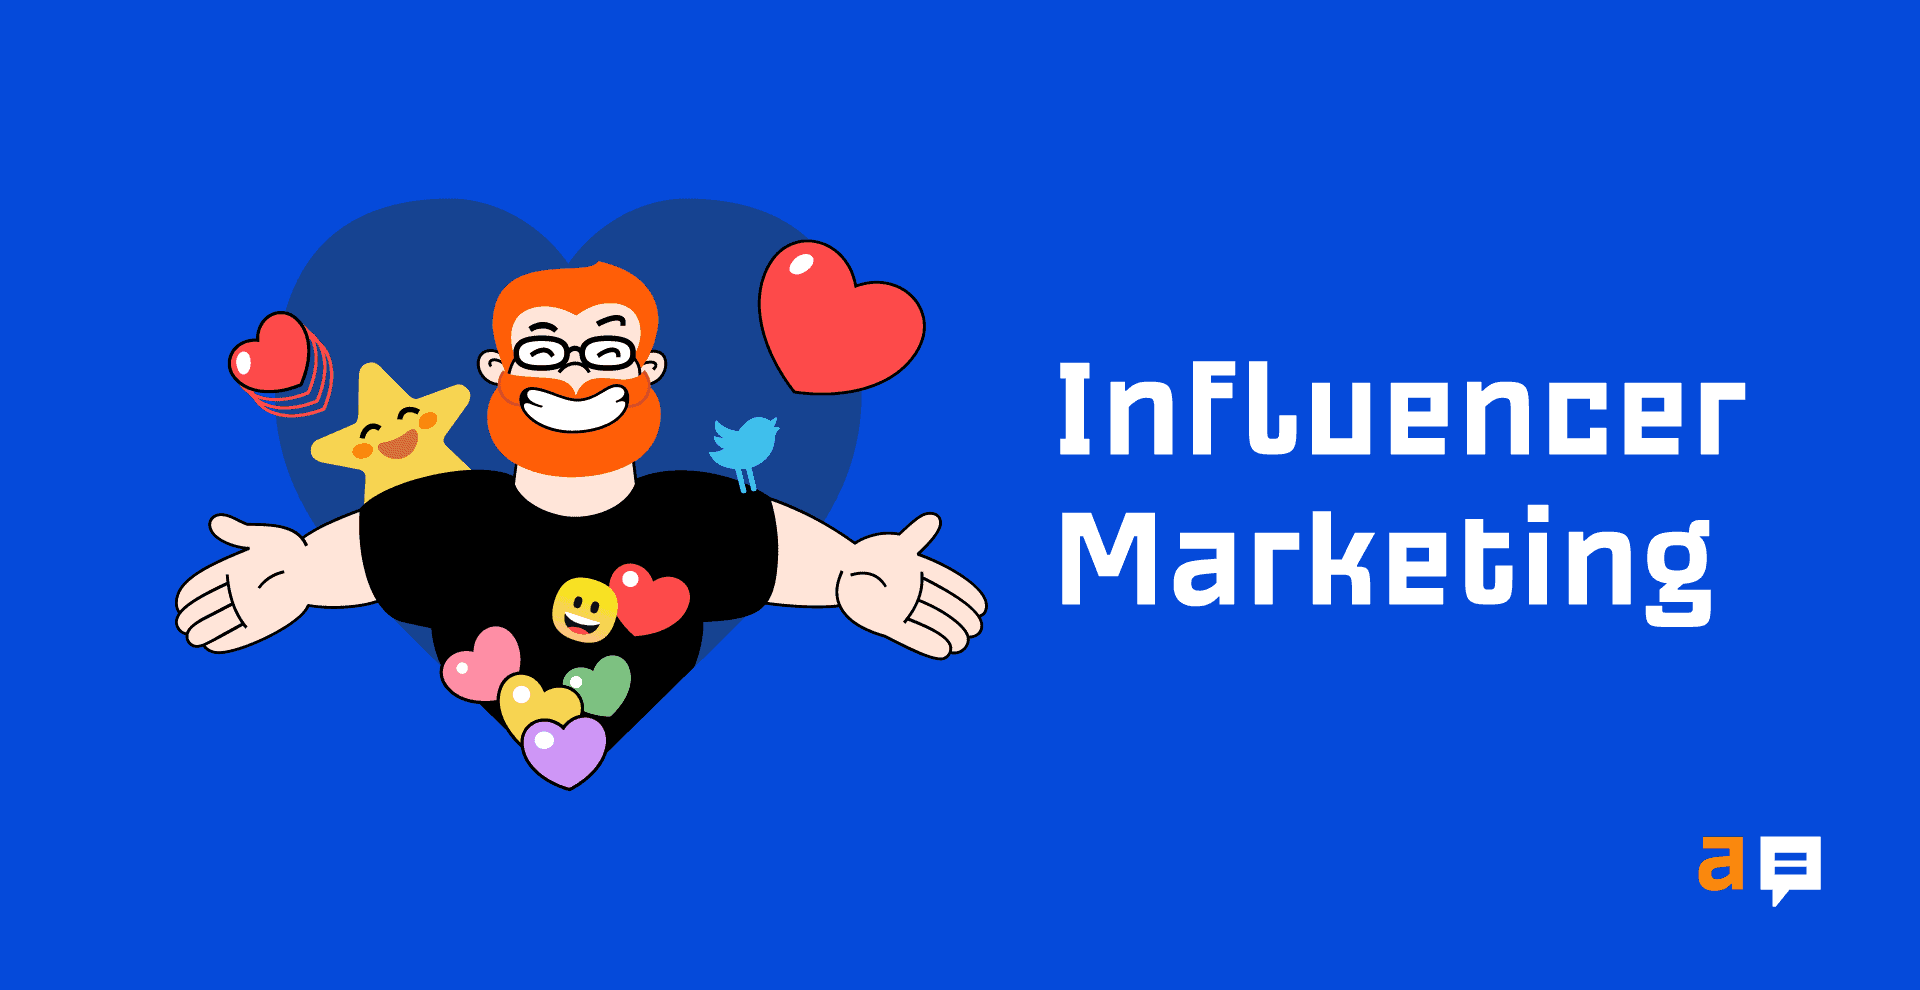 Influencer Marketing in 2021: Definition, Examples, and Tactics